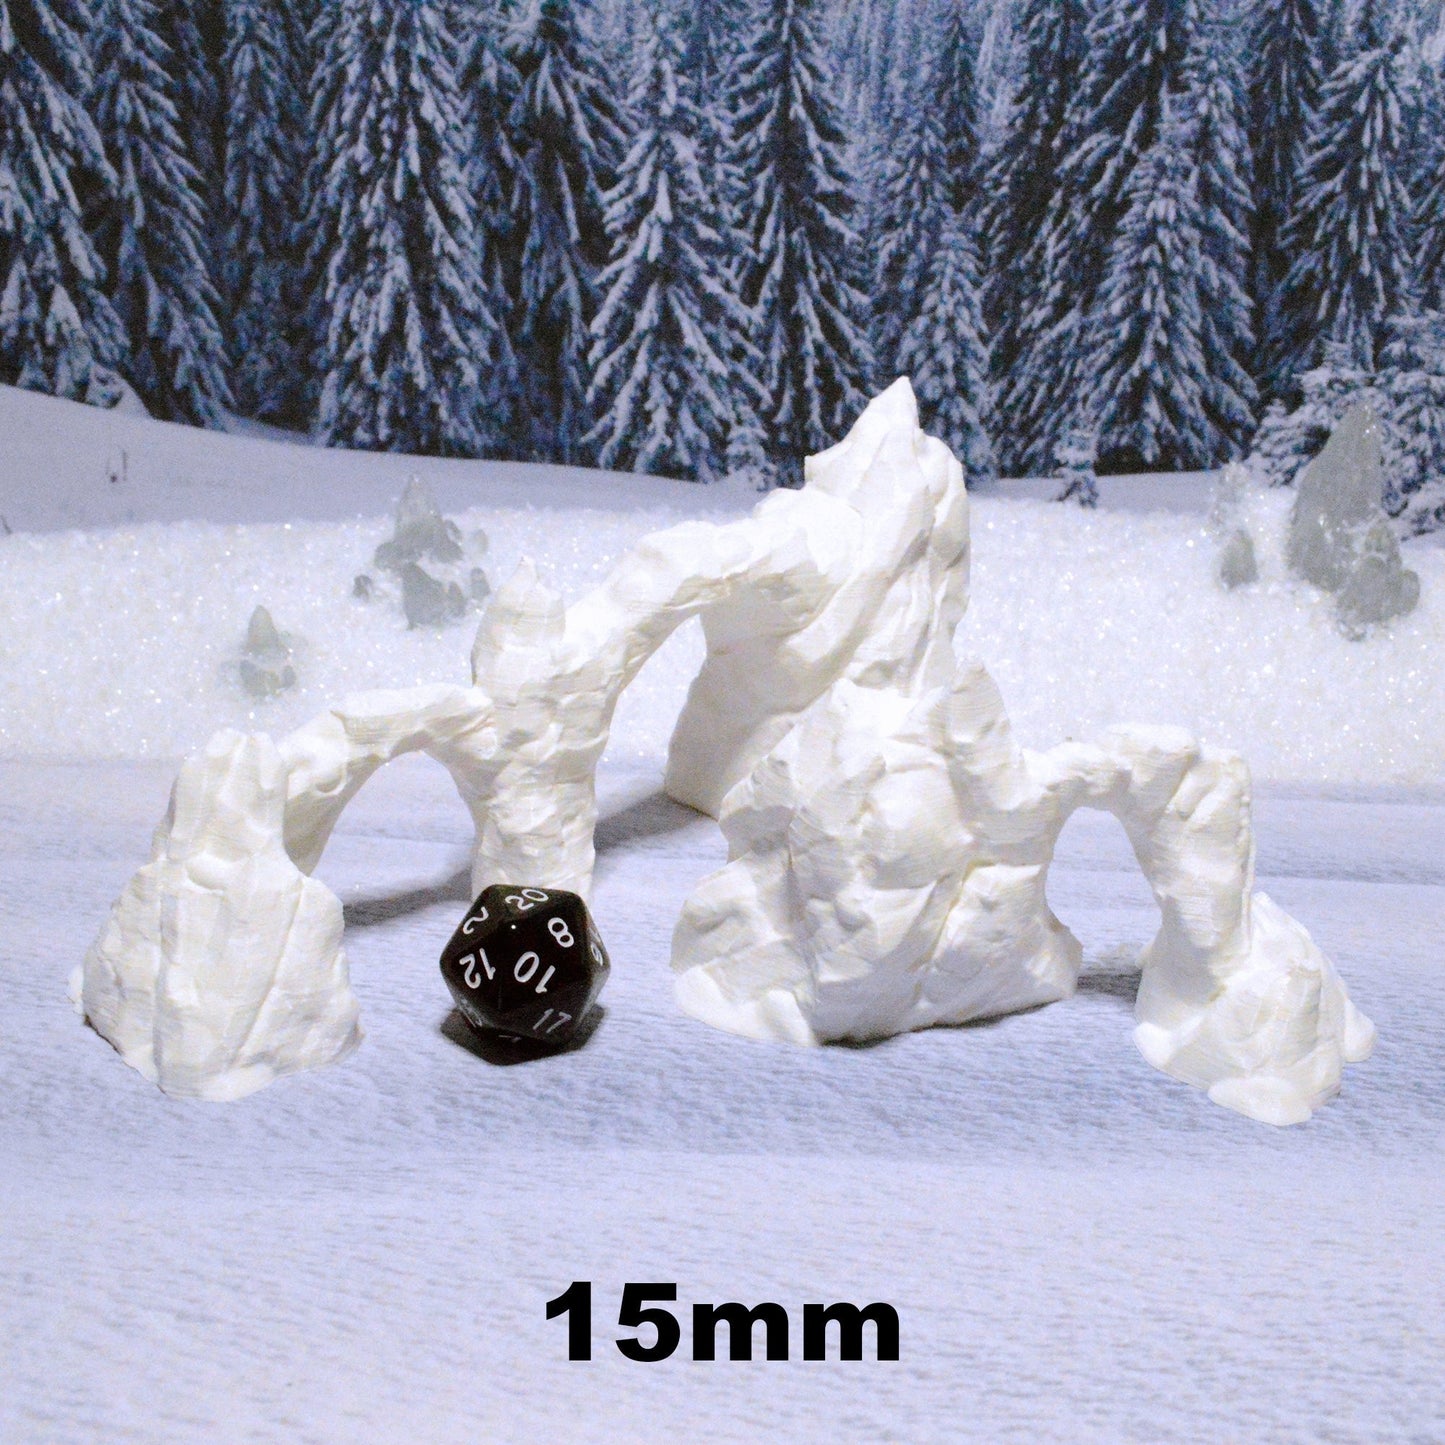 Snowy Rock Spines 15mm 28mm for D&D Icewind Dale Terrain, DnD Pathfinder Arctic Frozen Icy